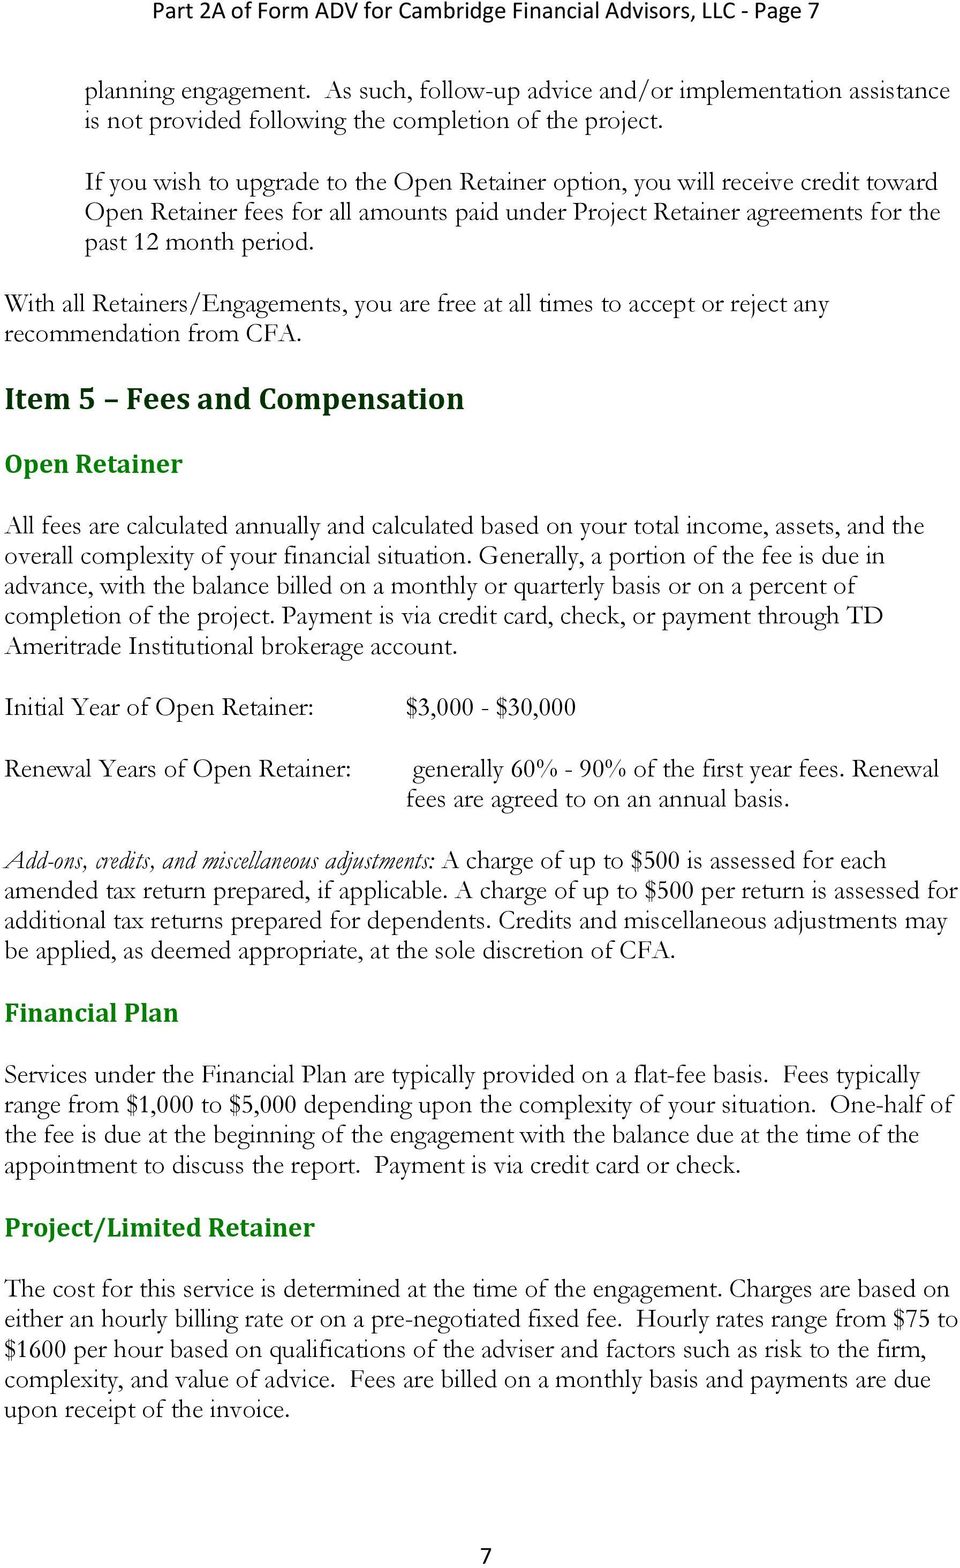 If you wish to upgrade to the Open Retainer option, you will receive credit toward Open Retainer fees for all amounts paid under Project Retainer agreements for the past 12 month period.